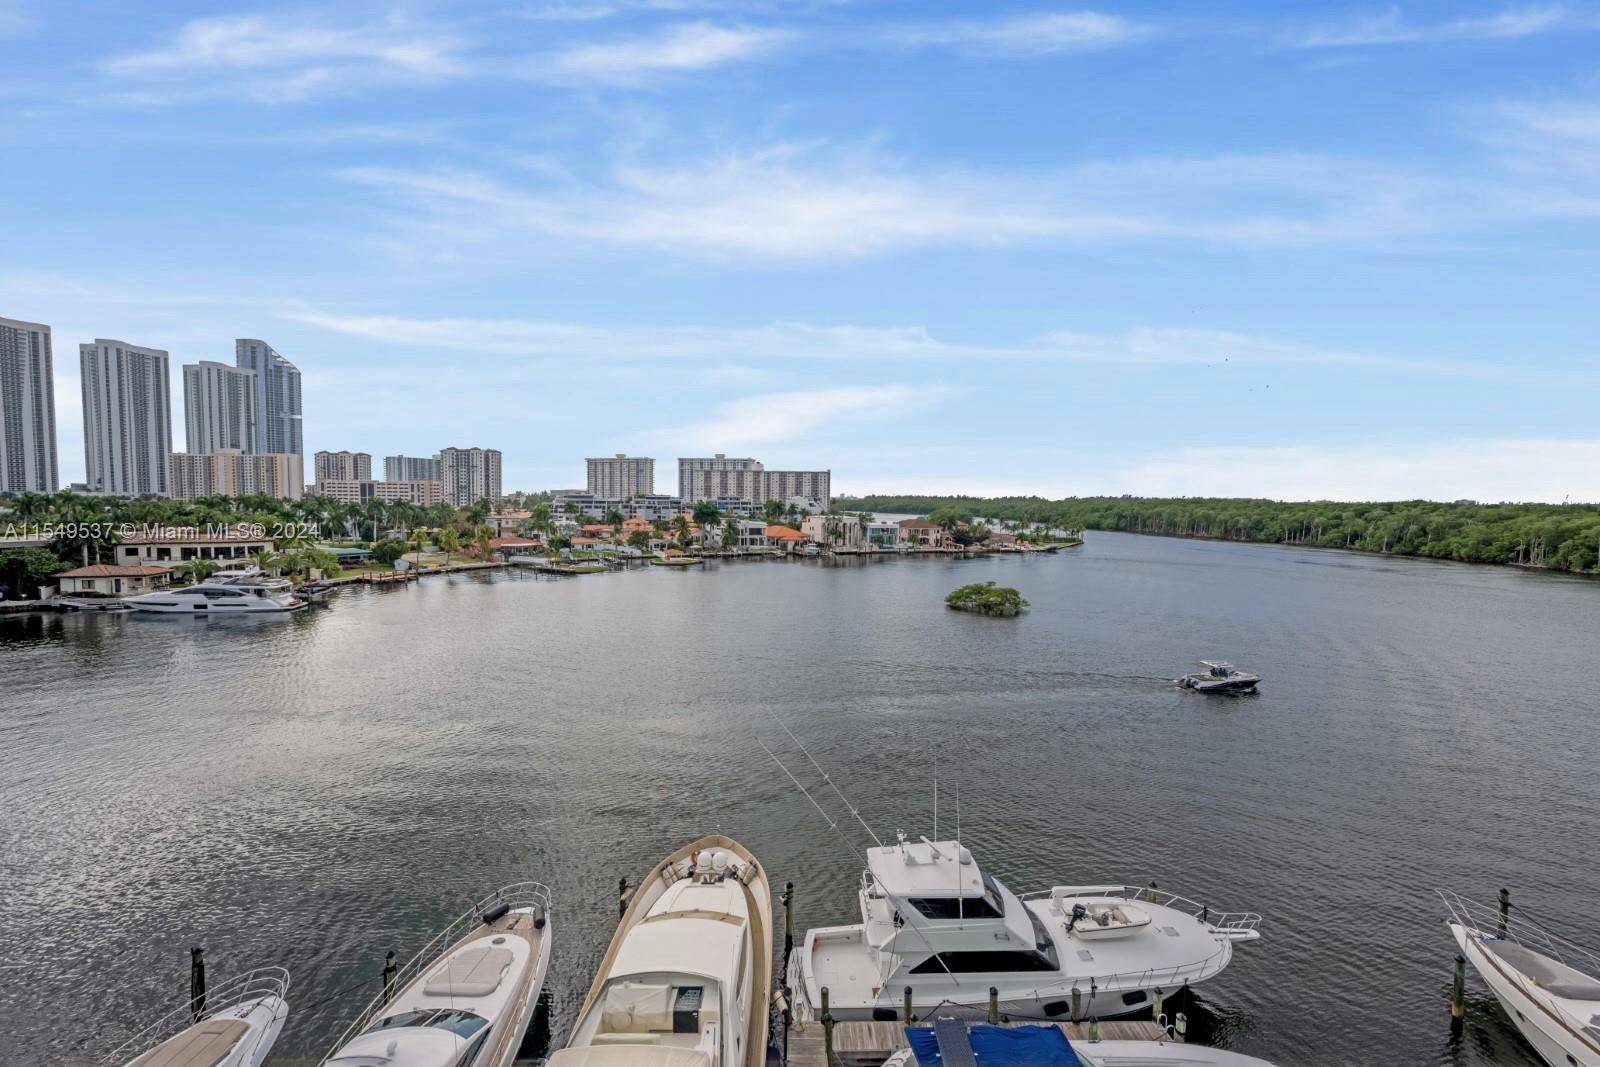 Indulge in the luxury of waterfront living in this exquisite 3 bedroom, 2 bathroom unit that boasts breathtaking views of the bay, ocean, and Oleta State Park.